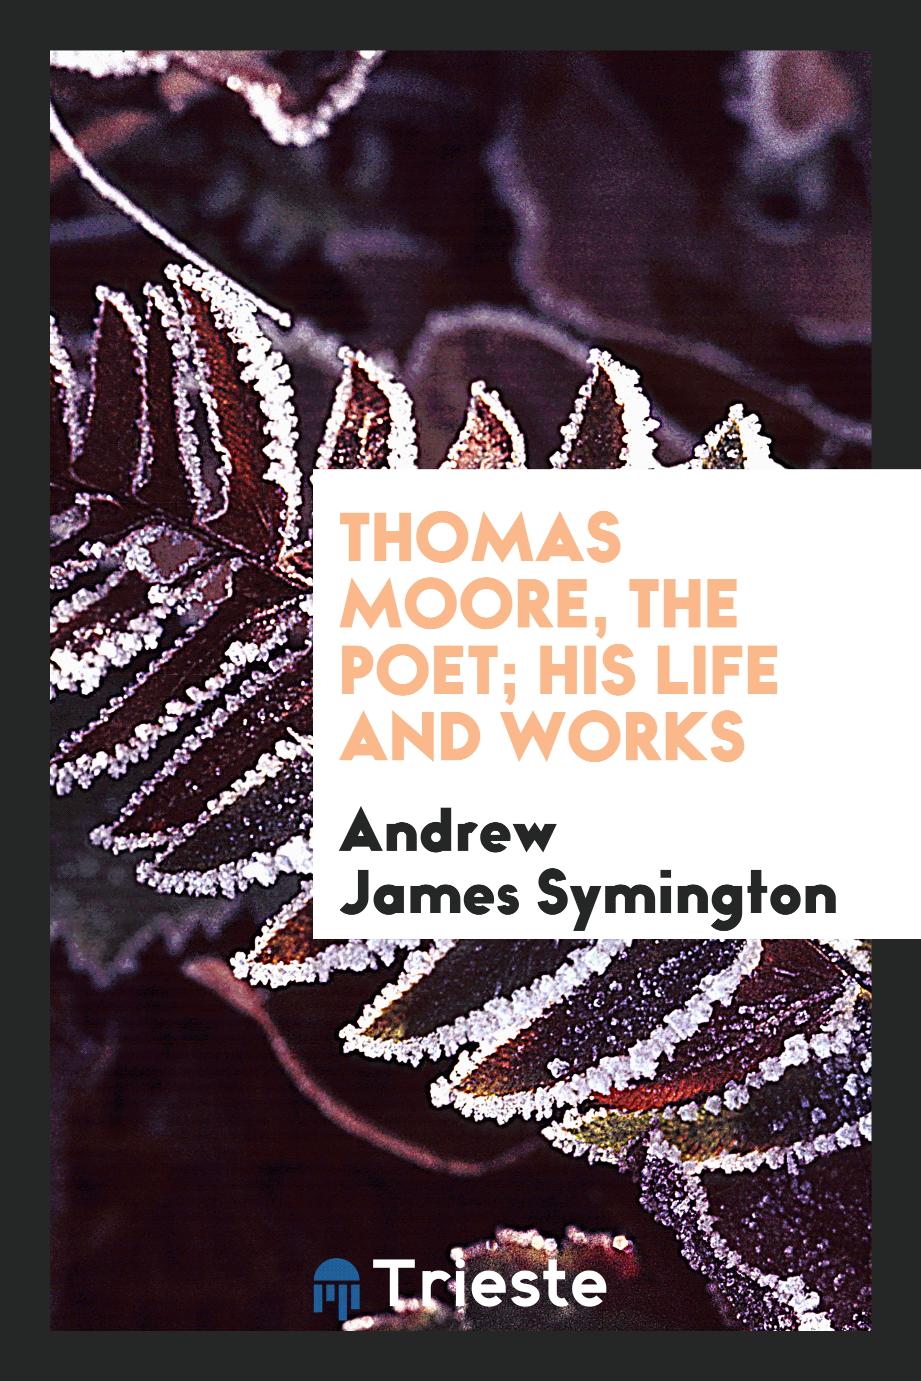 Thomas Moore, the poet; his life and works